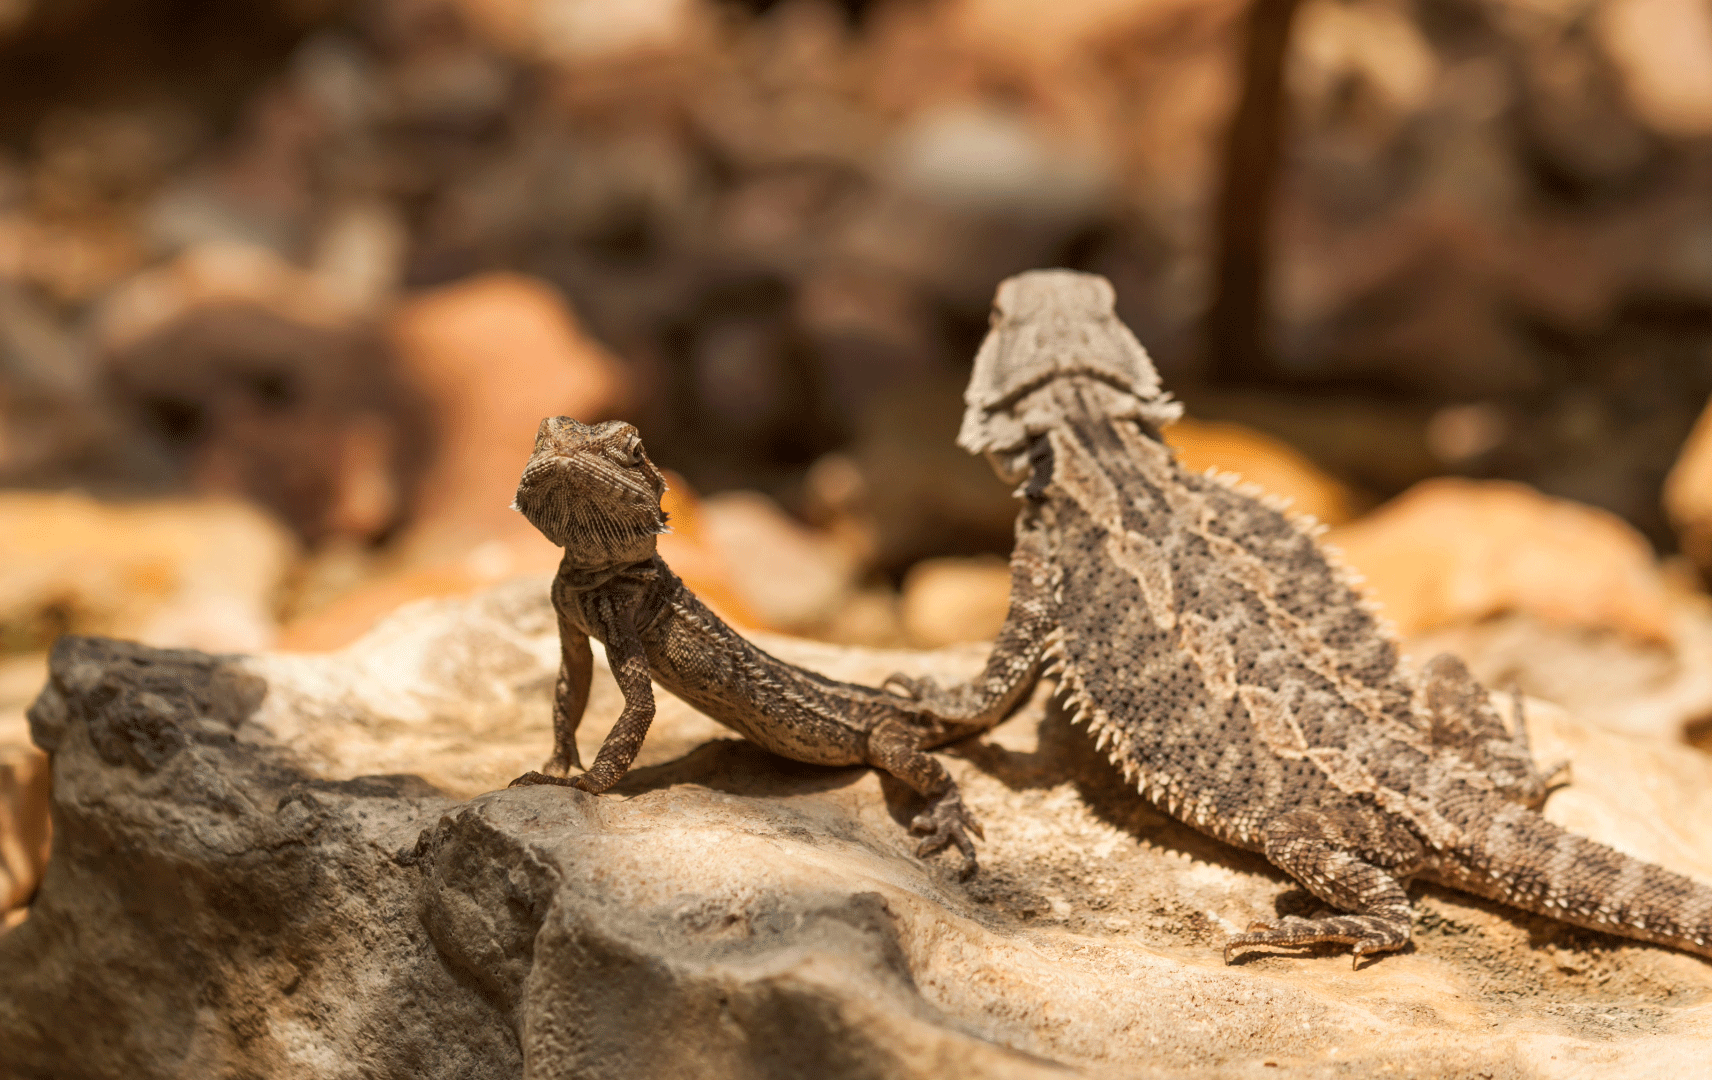 Two greater short horned lizards - one looking at the camera - on a rock.